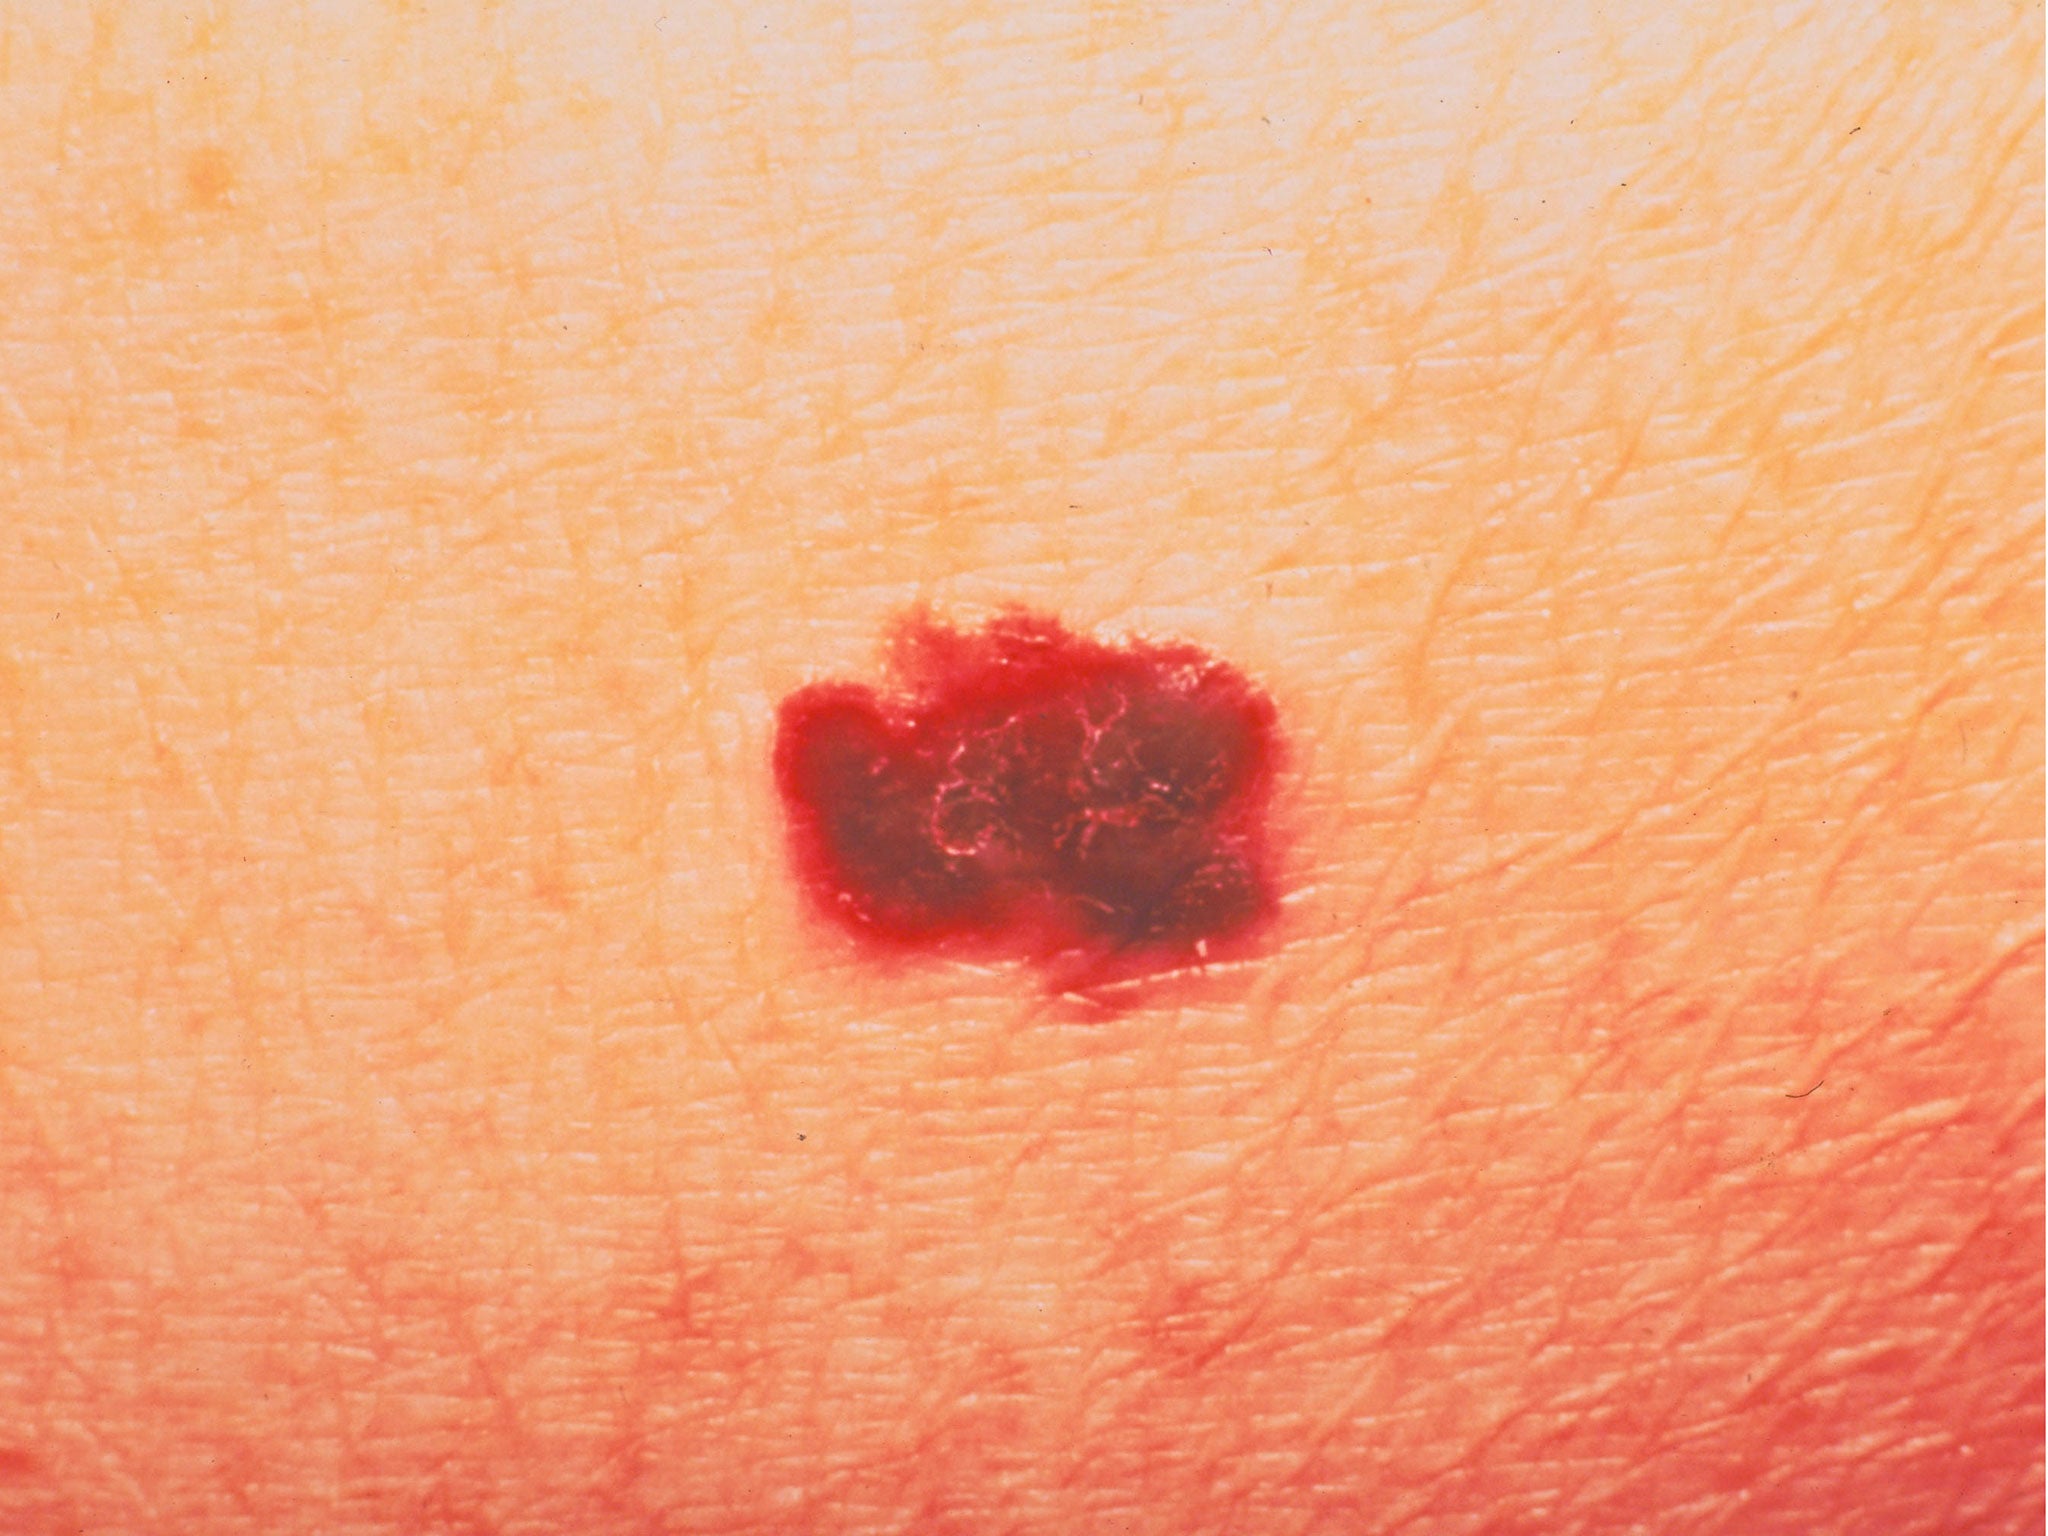 Detail of a person with a malignant melanoma